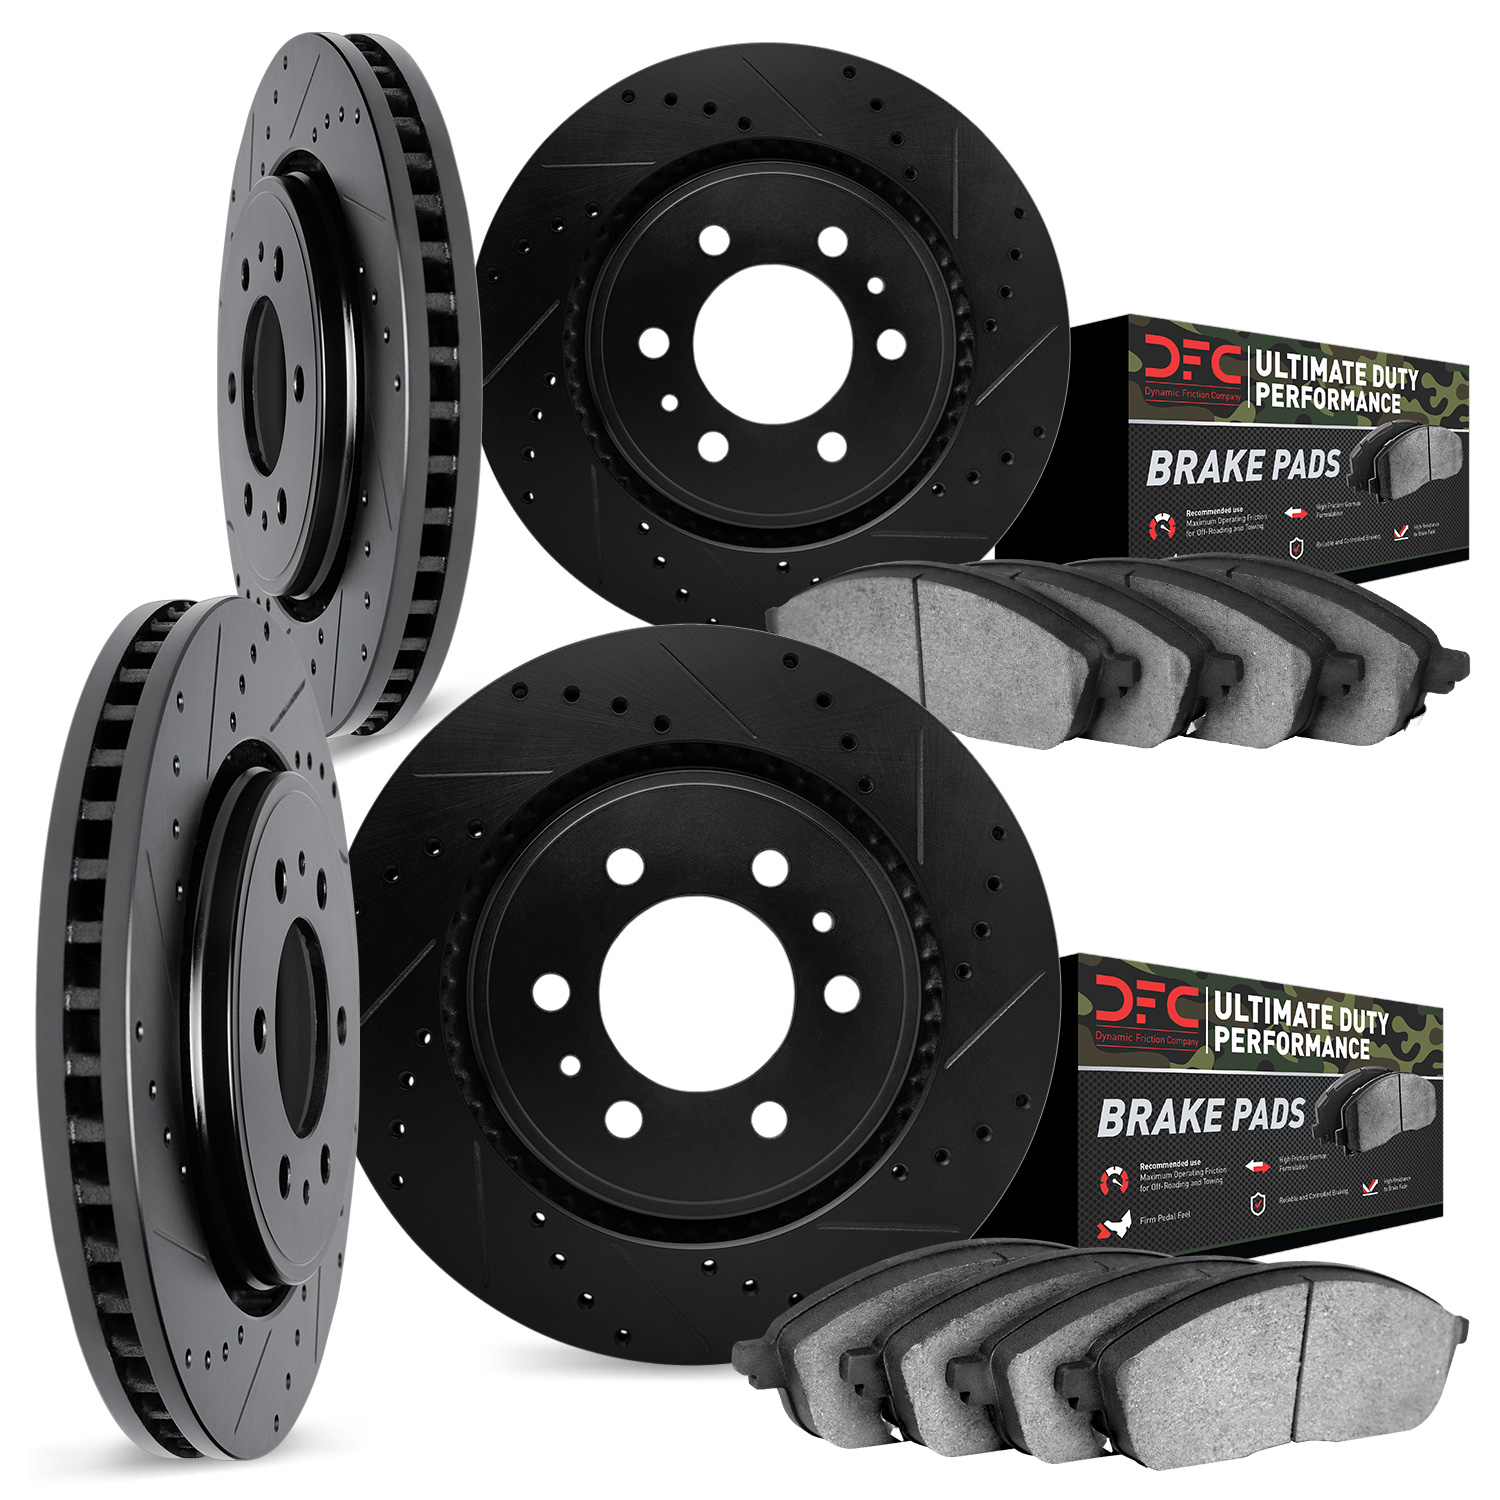 8404-67005 Drilled/Slotted Brake Rotors with Ultimate-Duty Brake Pads Kit [Black], Fits Select Infiniti/Nissan, Position: Front